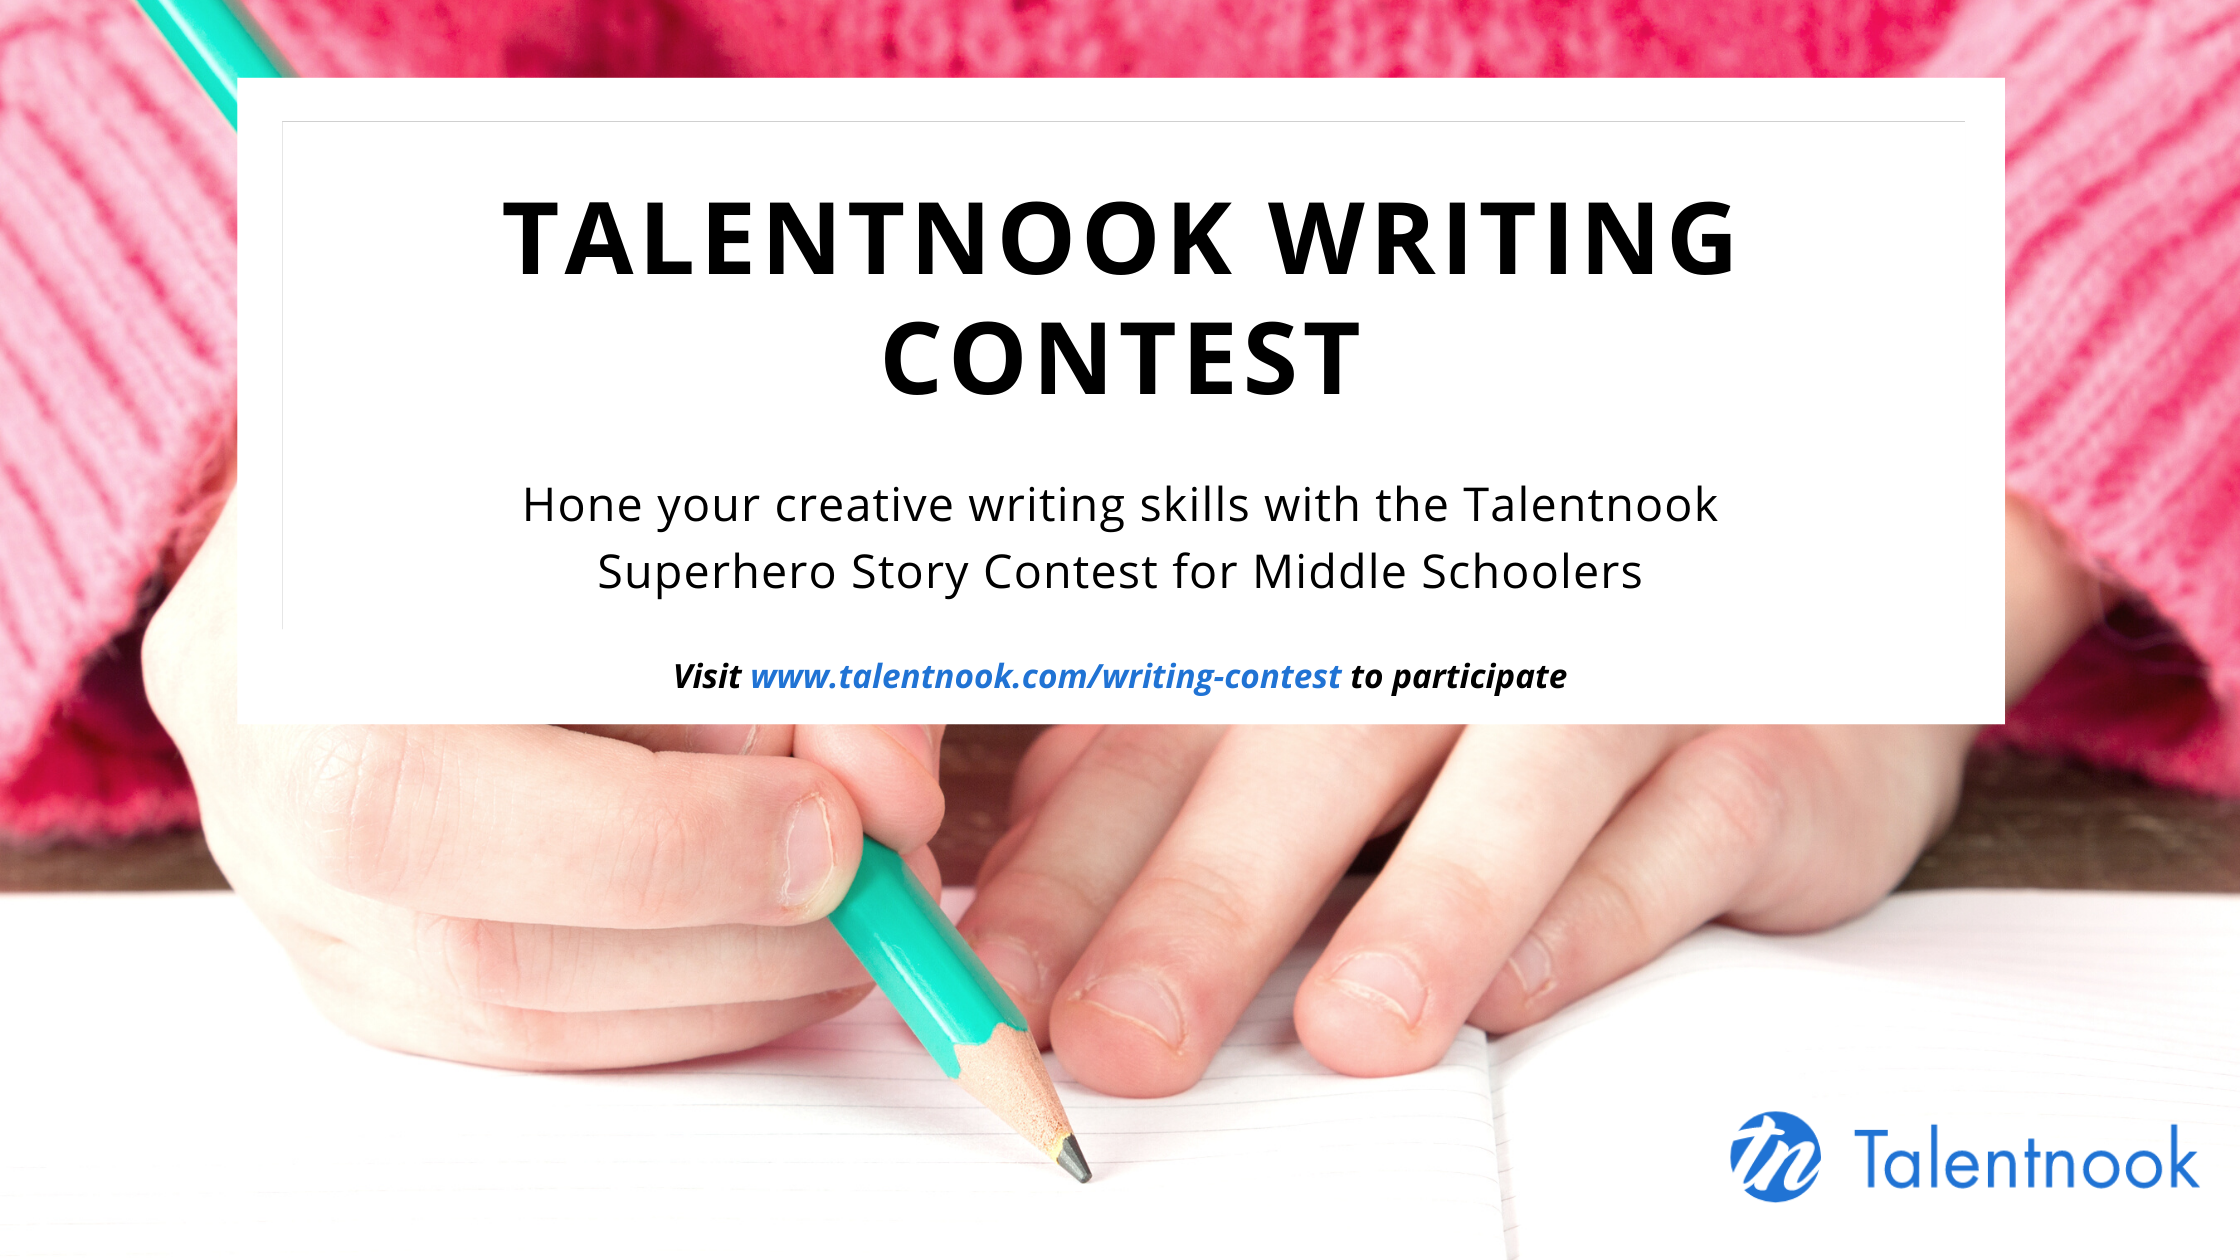 Hone your Creative Writing Skills with the Talentnook Writing Contest for Middle Schoolers